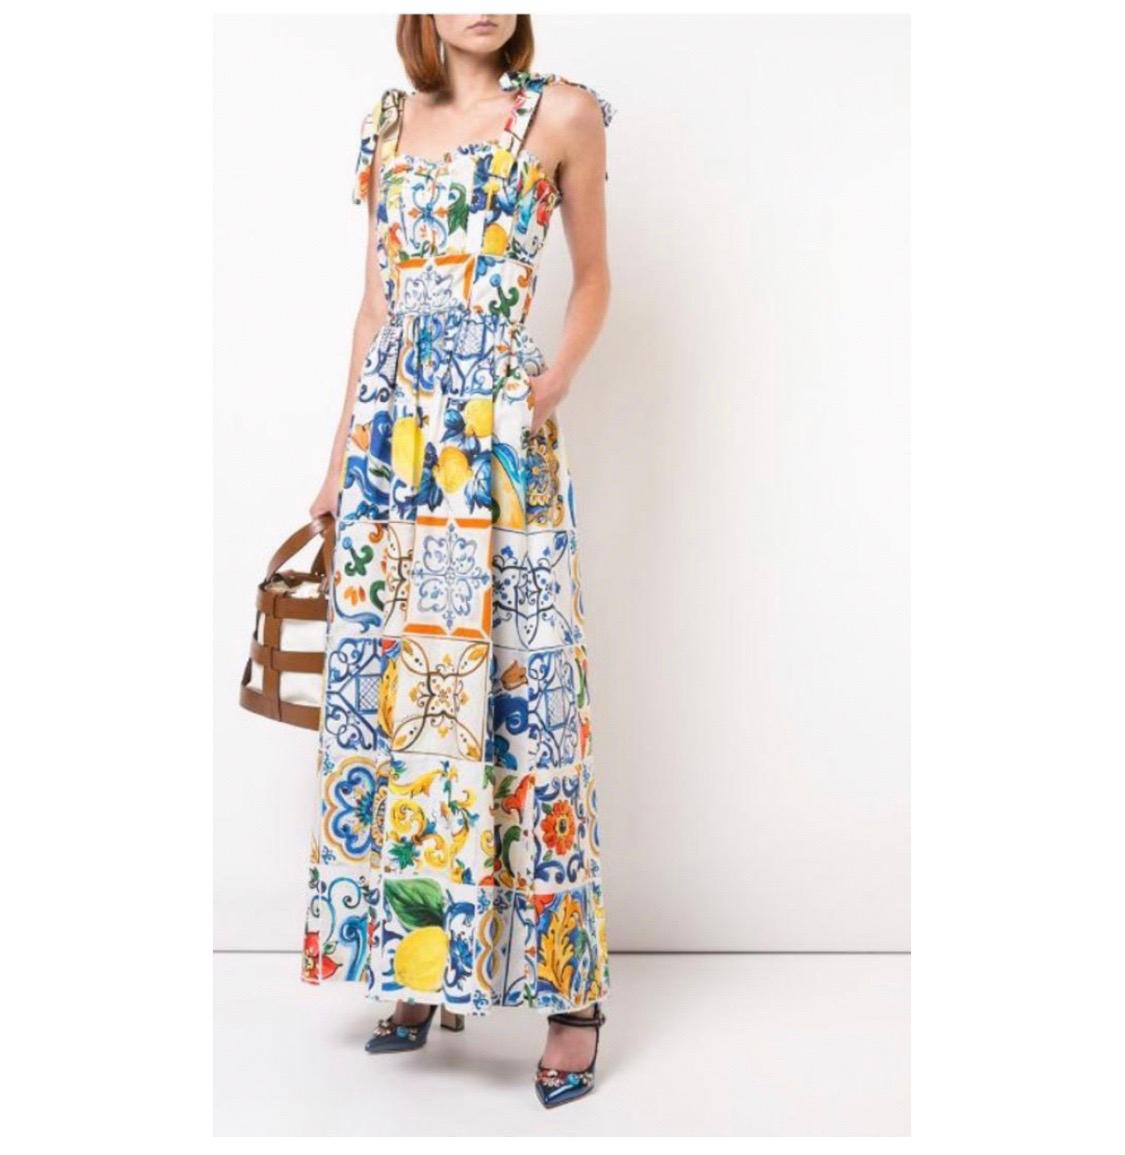 Dolce & Gabbana Sicily Maiolica
cotton maxi dress jumpsuit

Size 44IT - UK12 - L

100% cotton

Brand new with tags!

RRP 1750EUR

Please check my other DG clothing
shoes & beachwear & accessories in
this print!